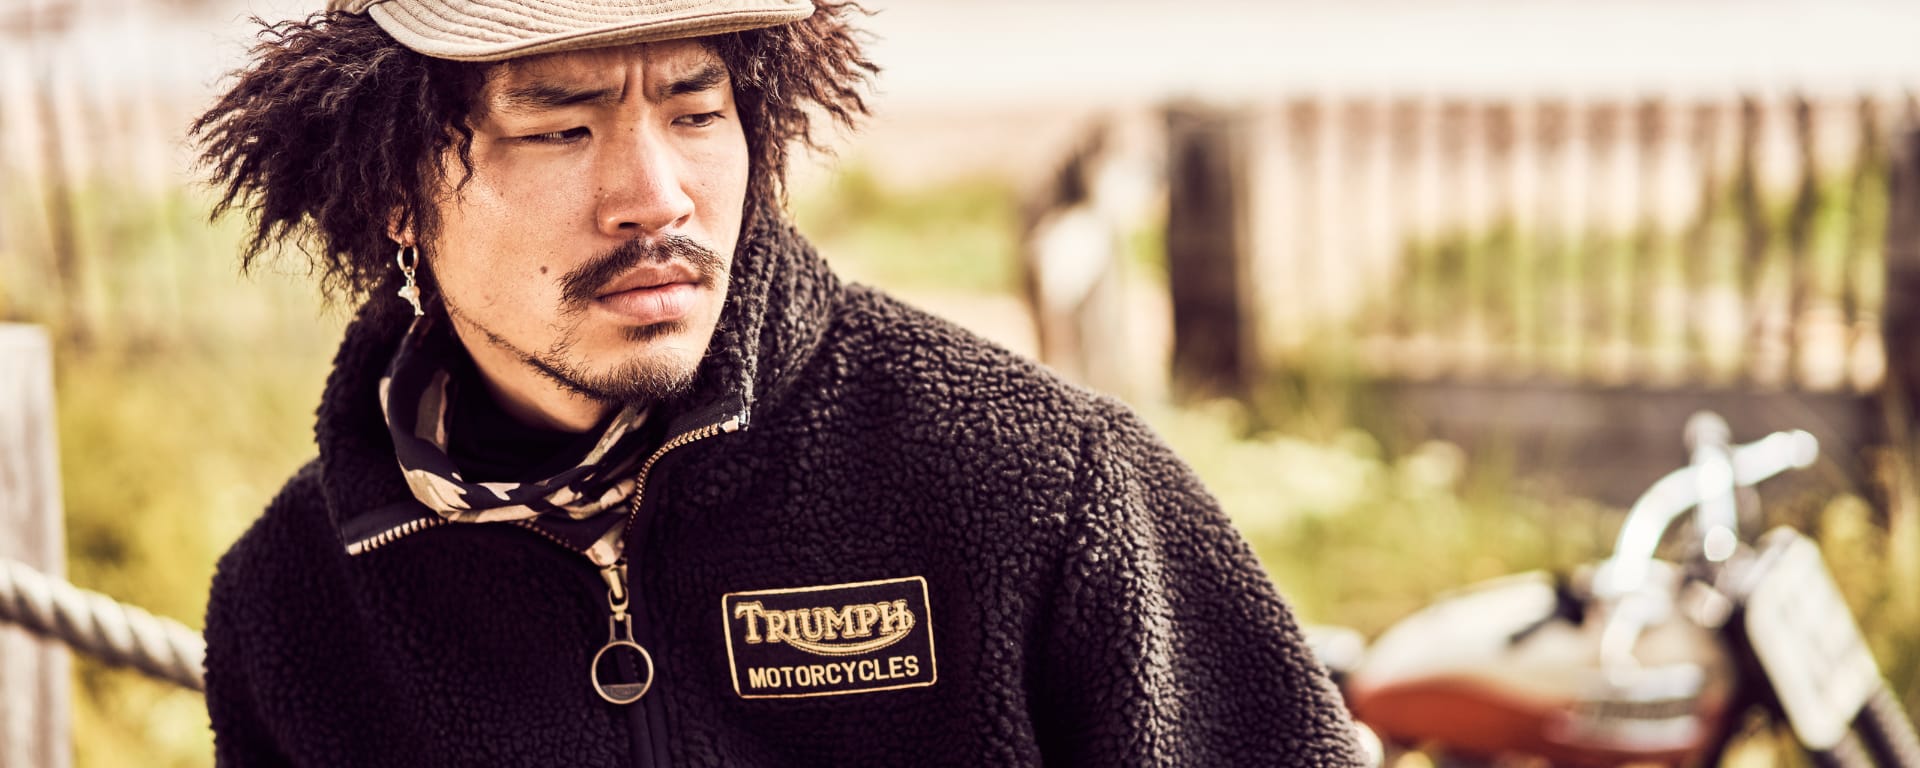 A Triumph model is wearing the Roadhouse Fleece with grassy sand dunes and a Triumph motorcycle behind them.)